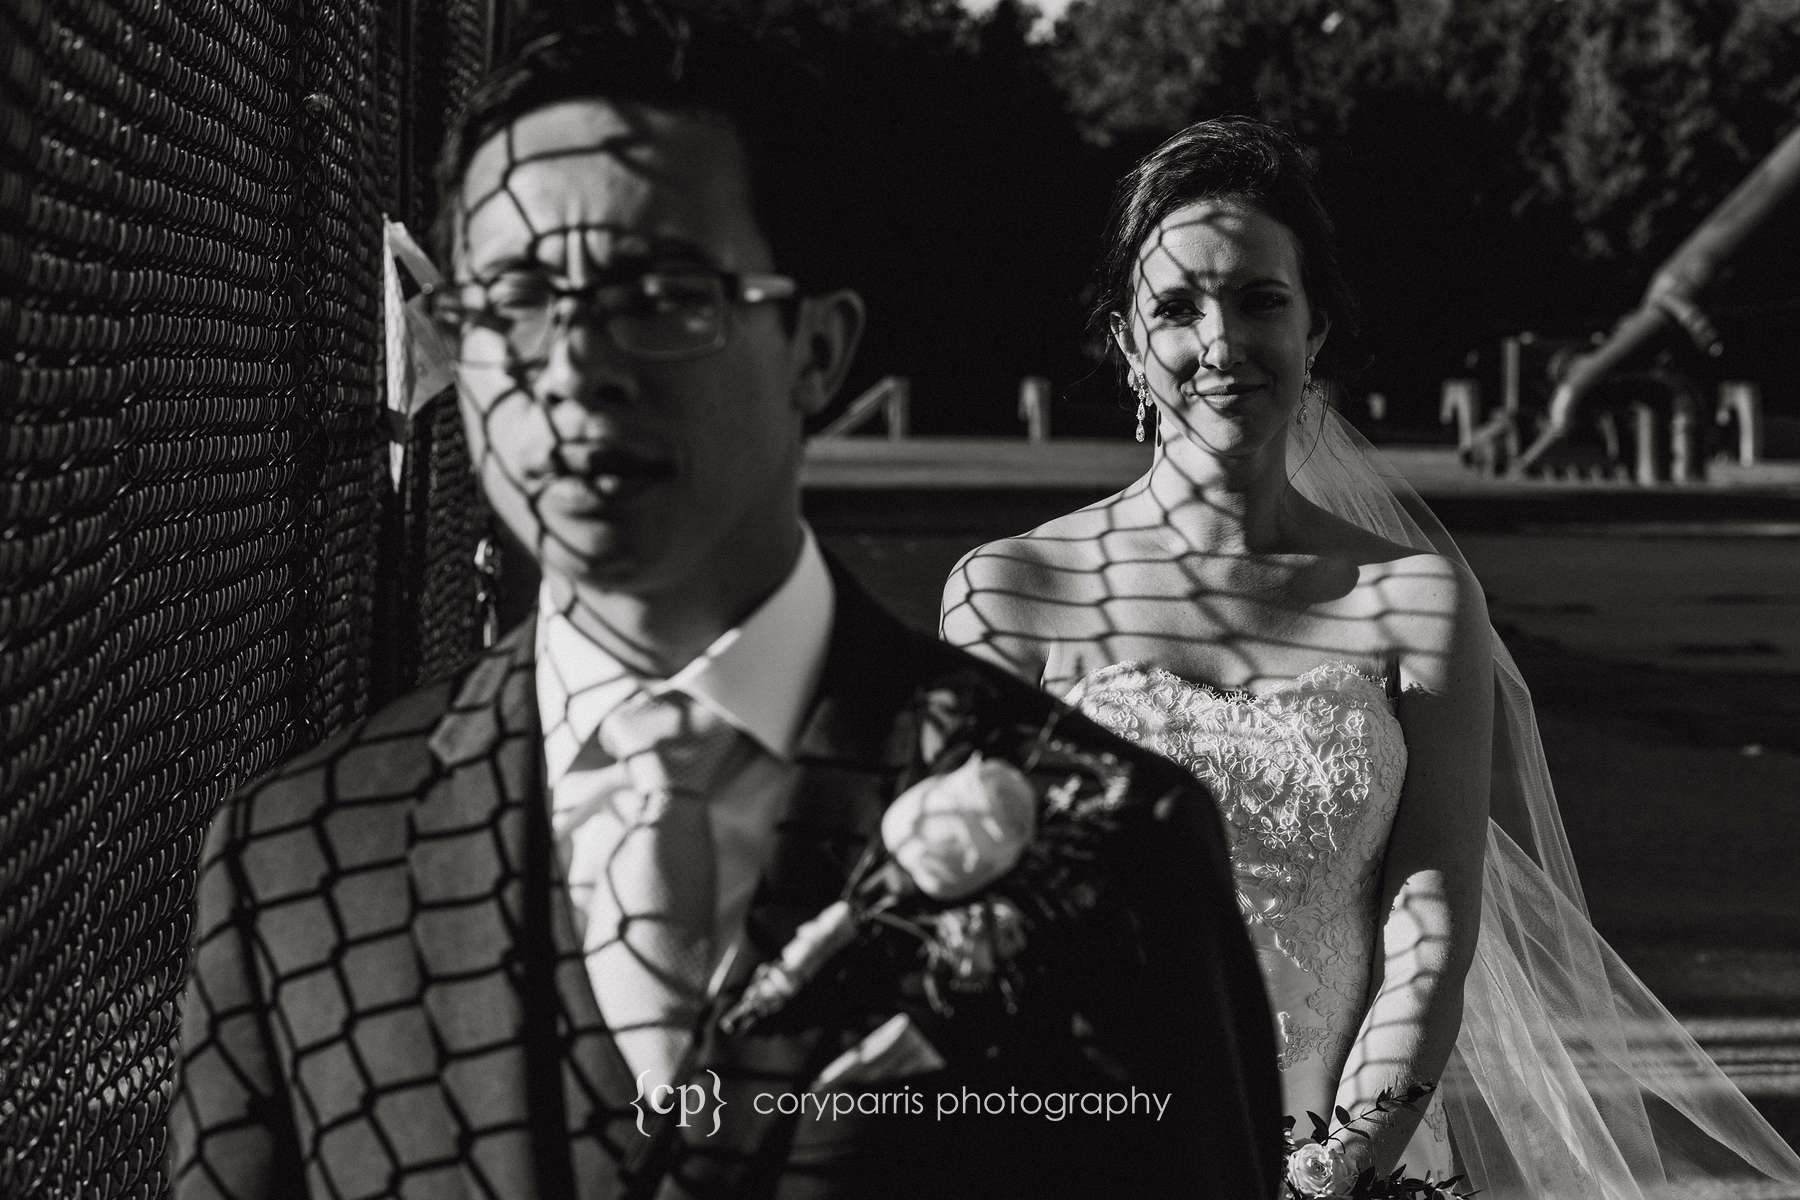  This one was interesting to me. I was playing with the pattern of light through the fence. I like the image, but it is a bit different for a wedding photograph.&nbsp; 